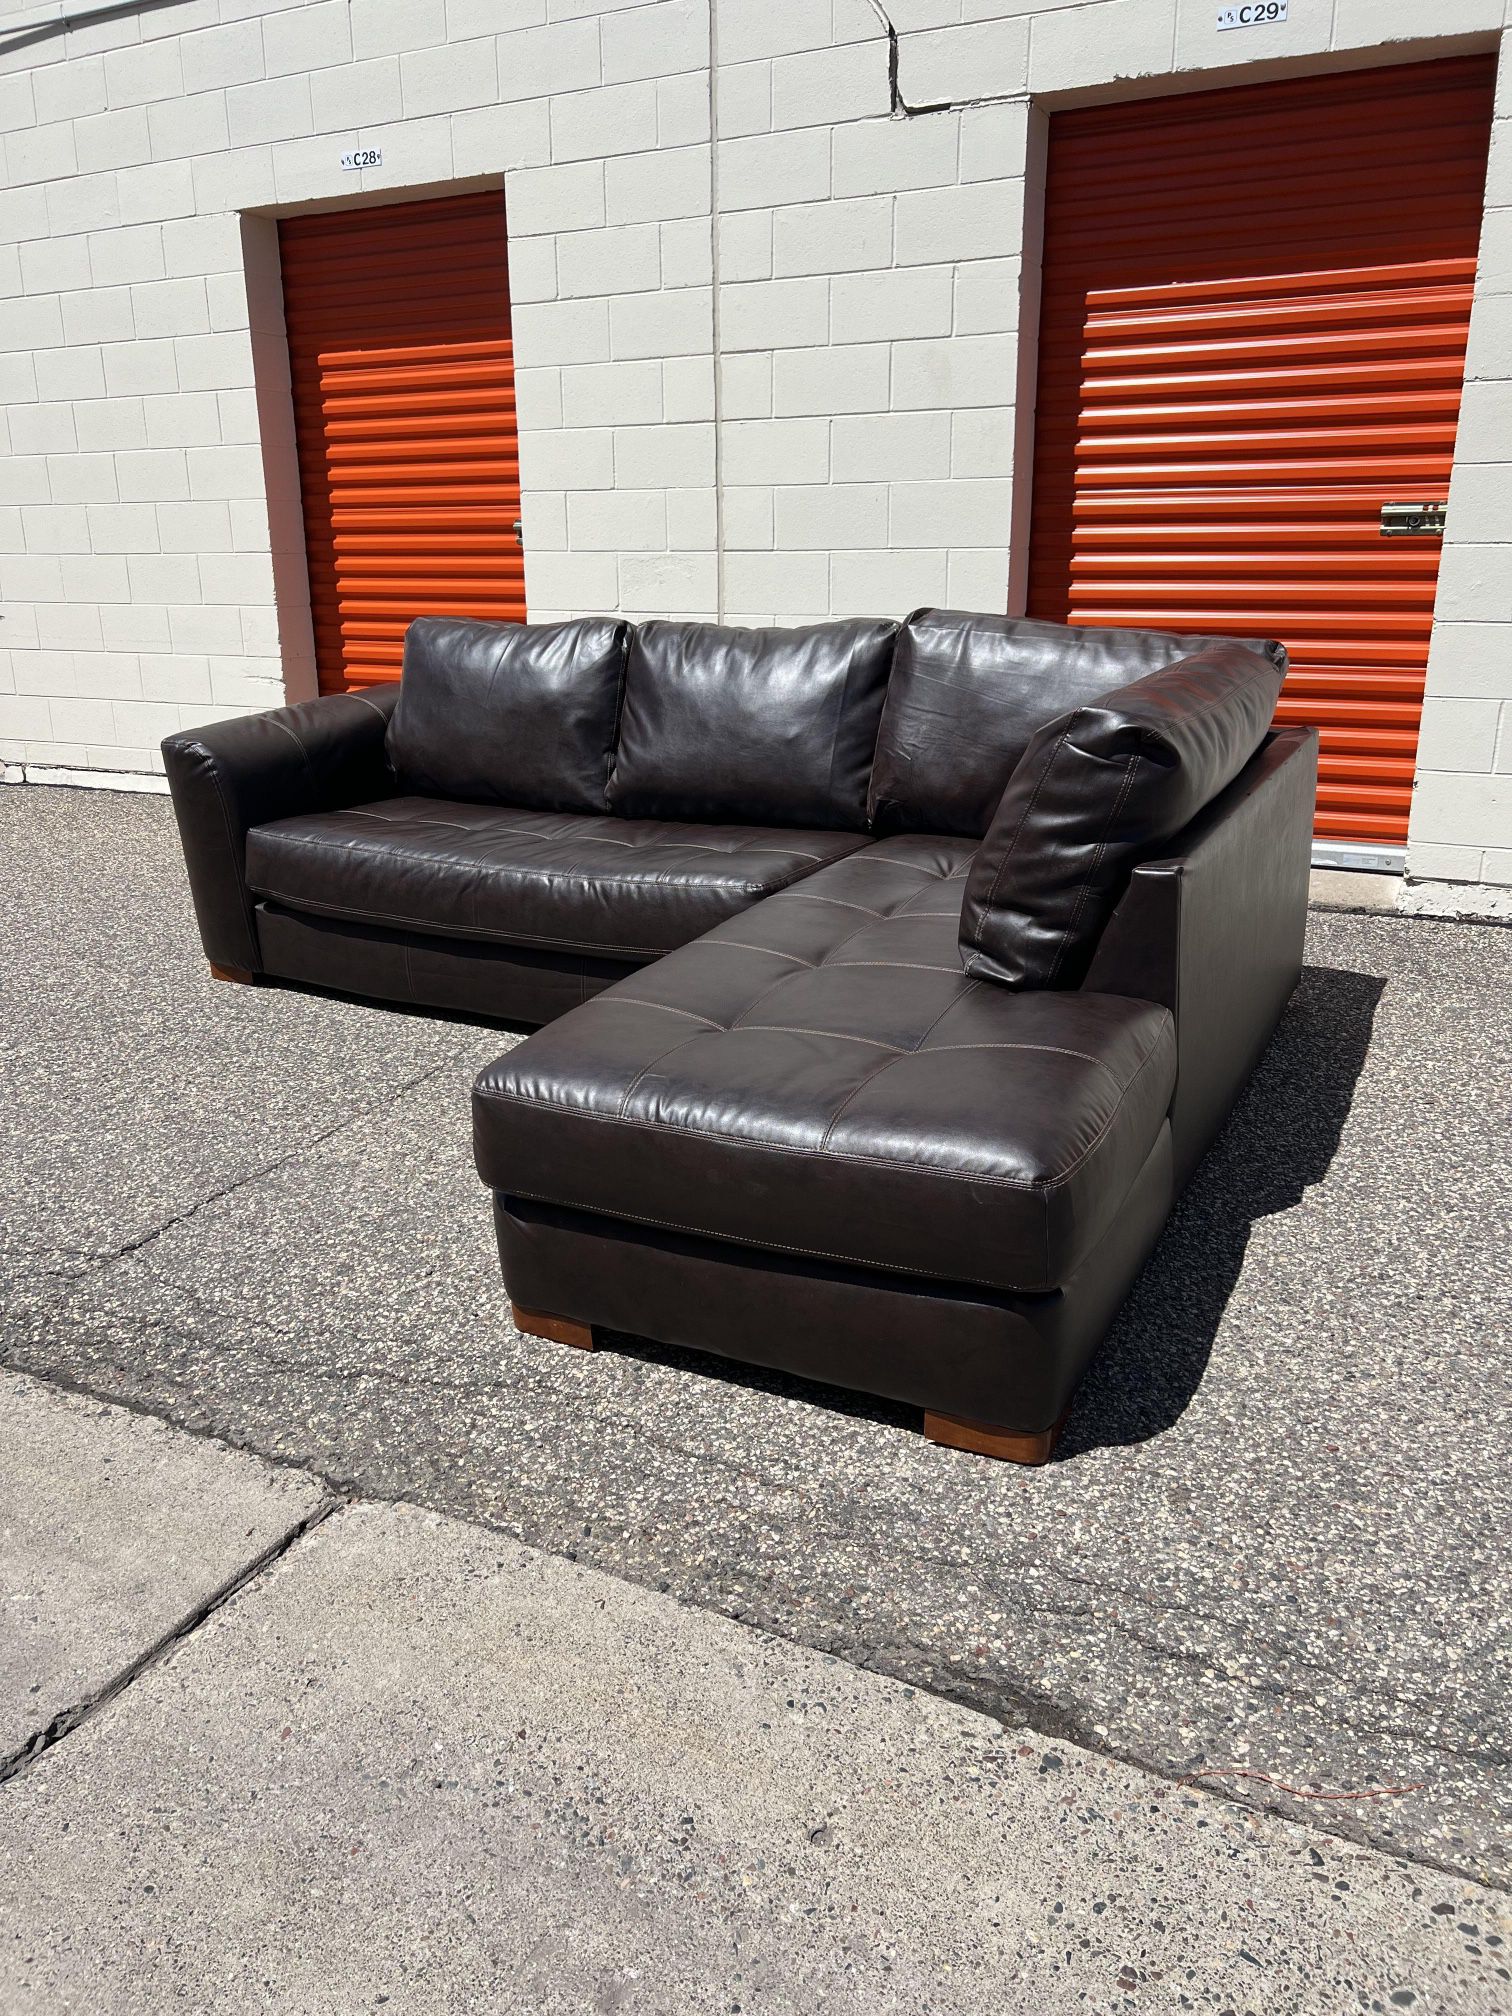 (FREE DELIVERY AVAILABLE) Brown Leather Sectional Couch/Sofa